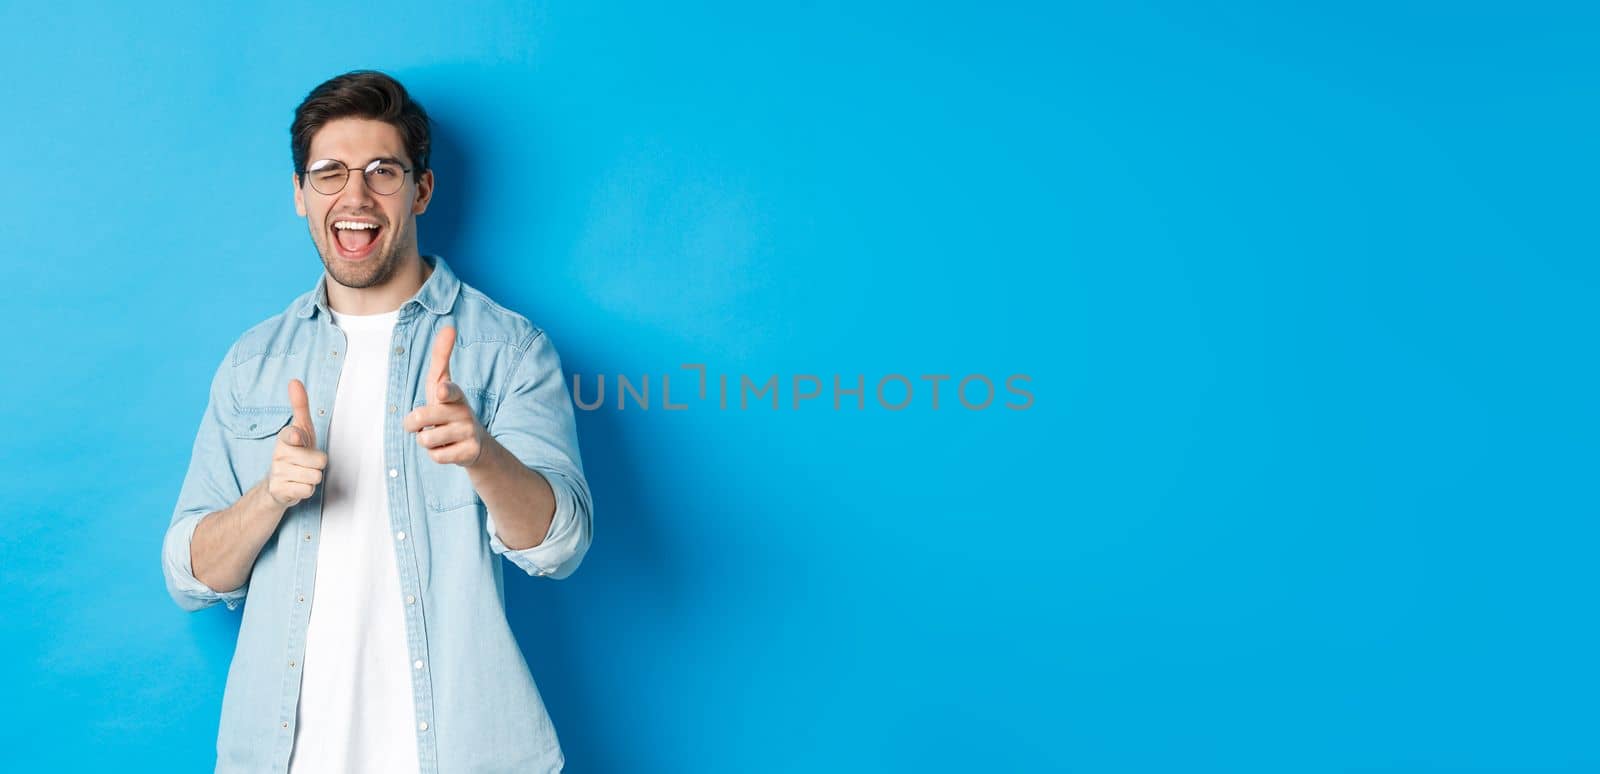 Confident man saying congrats, winking and pointing at you, standing pleased over blue background and smiling.